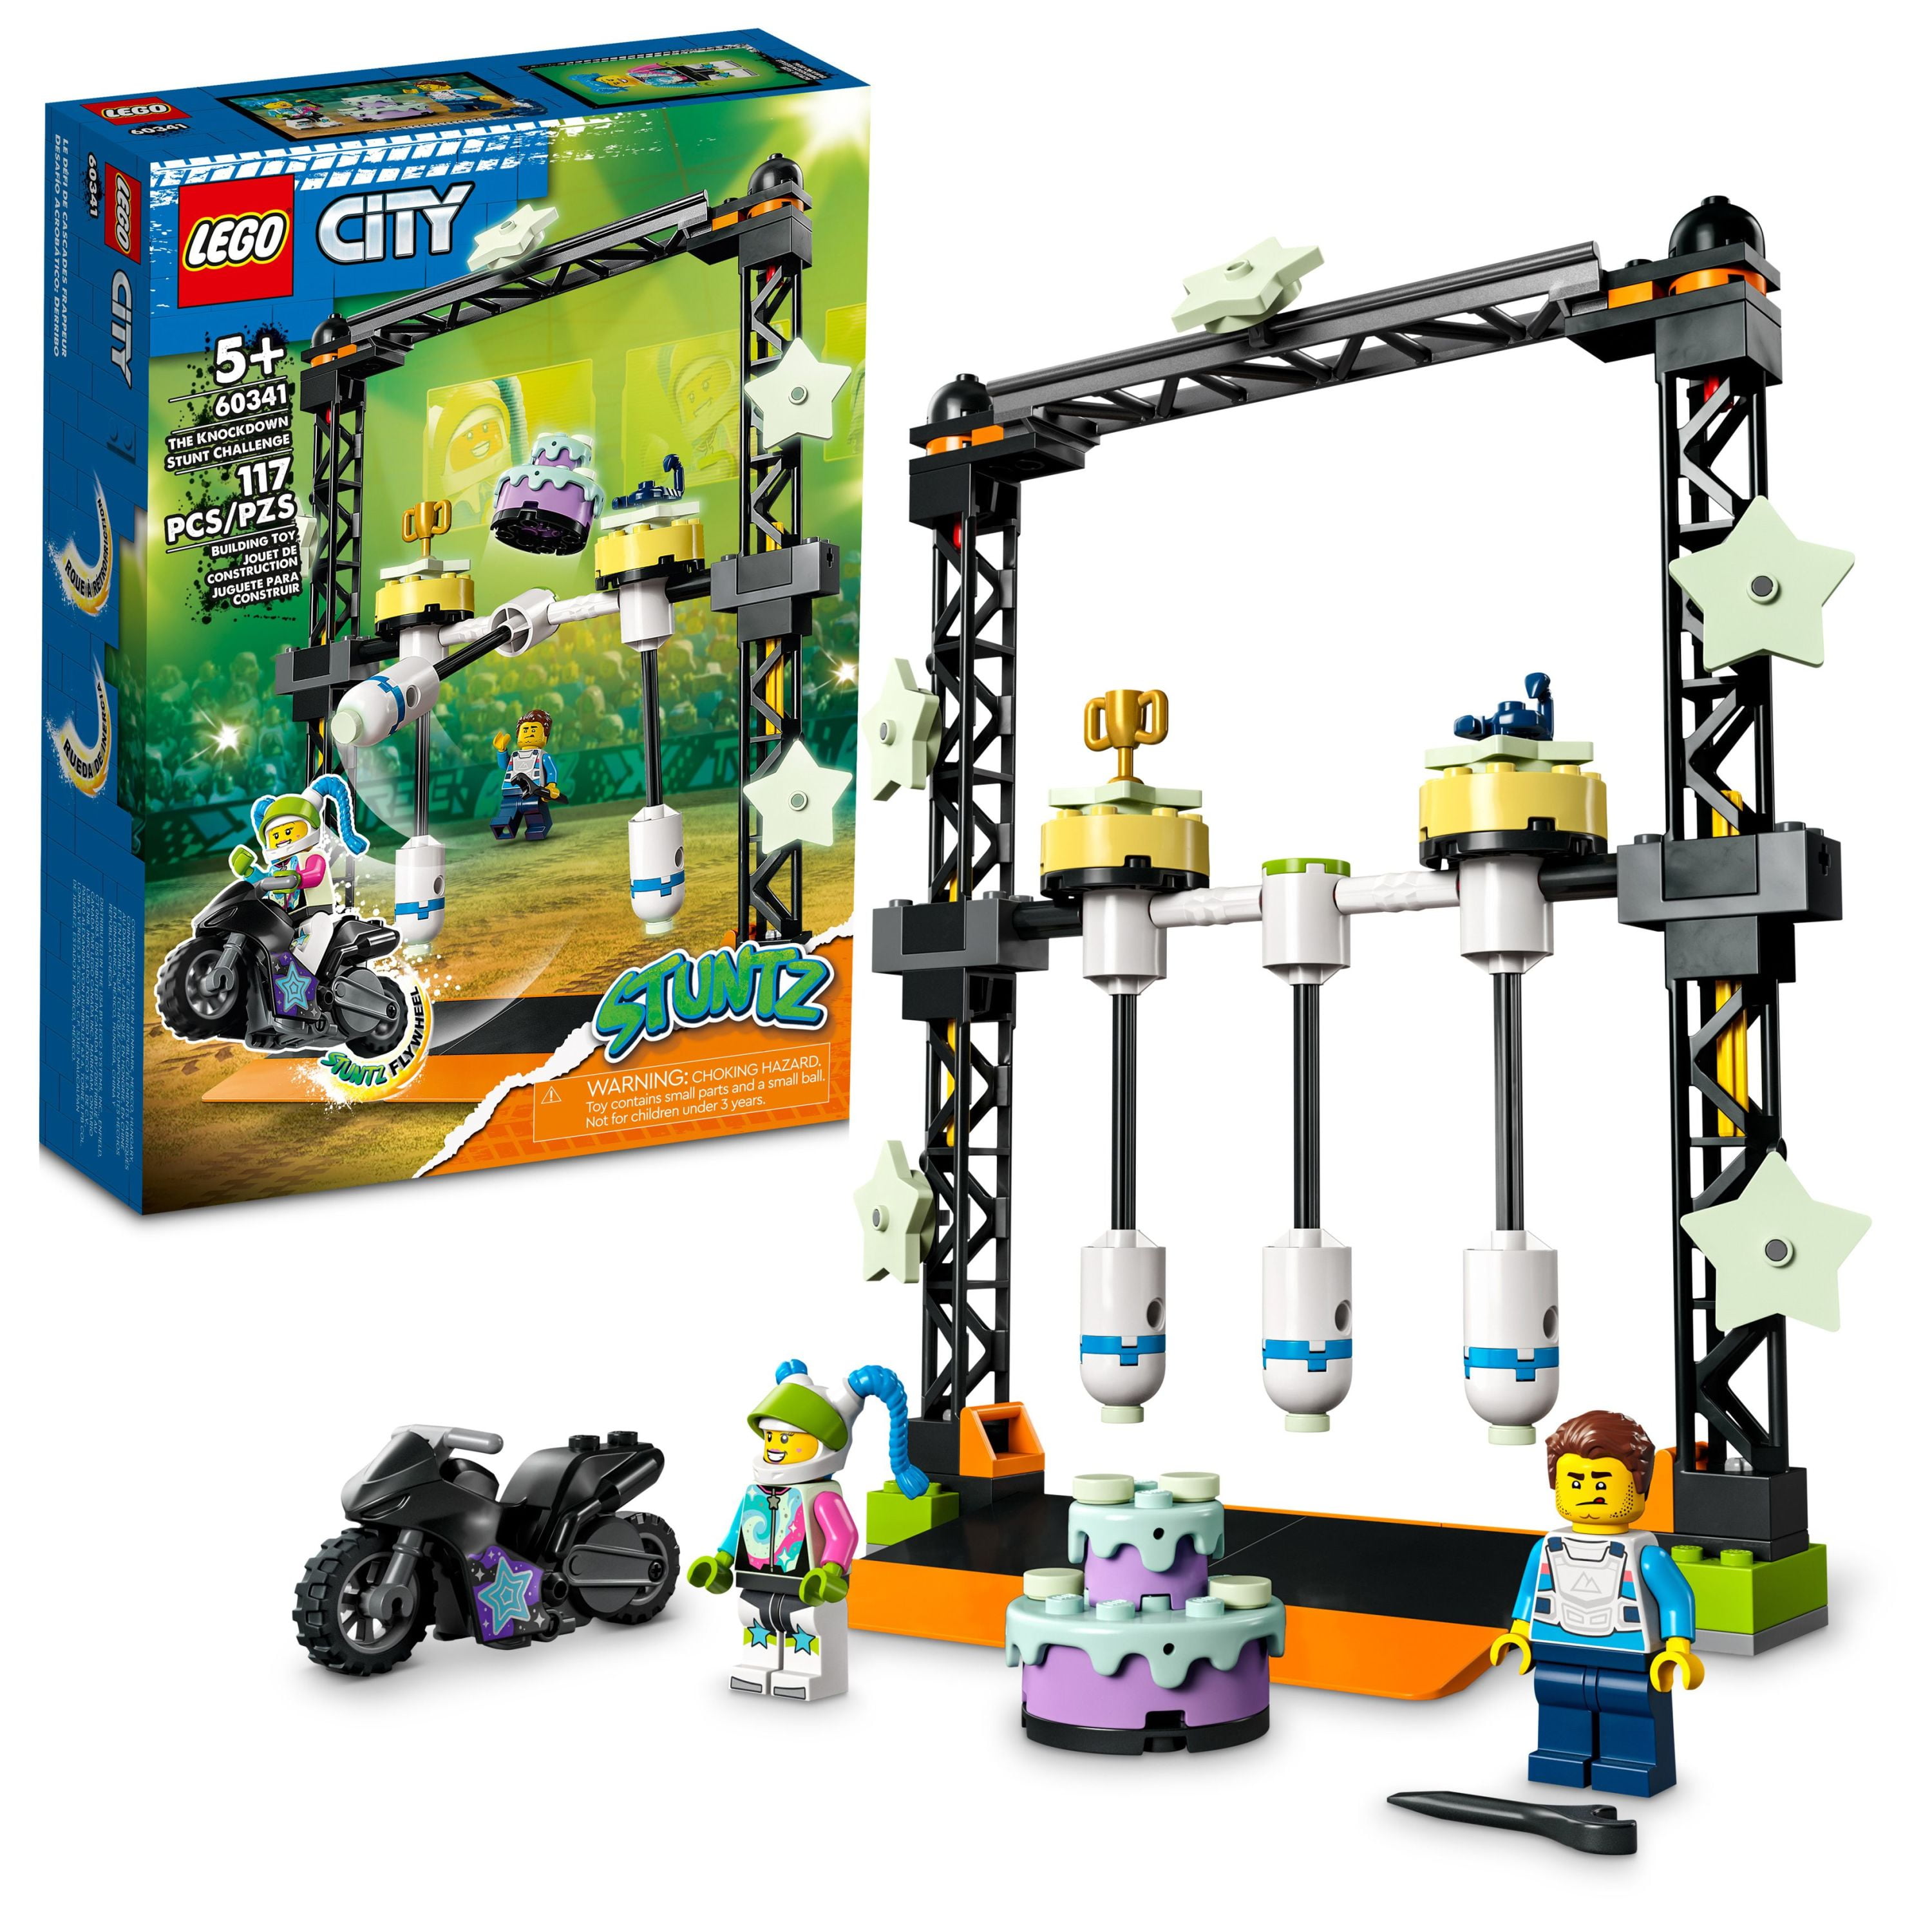 LEGO City Stuntz The Knockdown Stunt Challenge Playset, 60341 Adventure TV Series Action Toy For Kids Aged 5 plus with Stunt Bike, Racer & Accessories